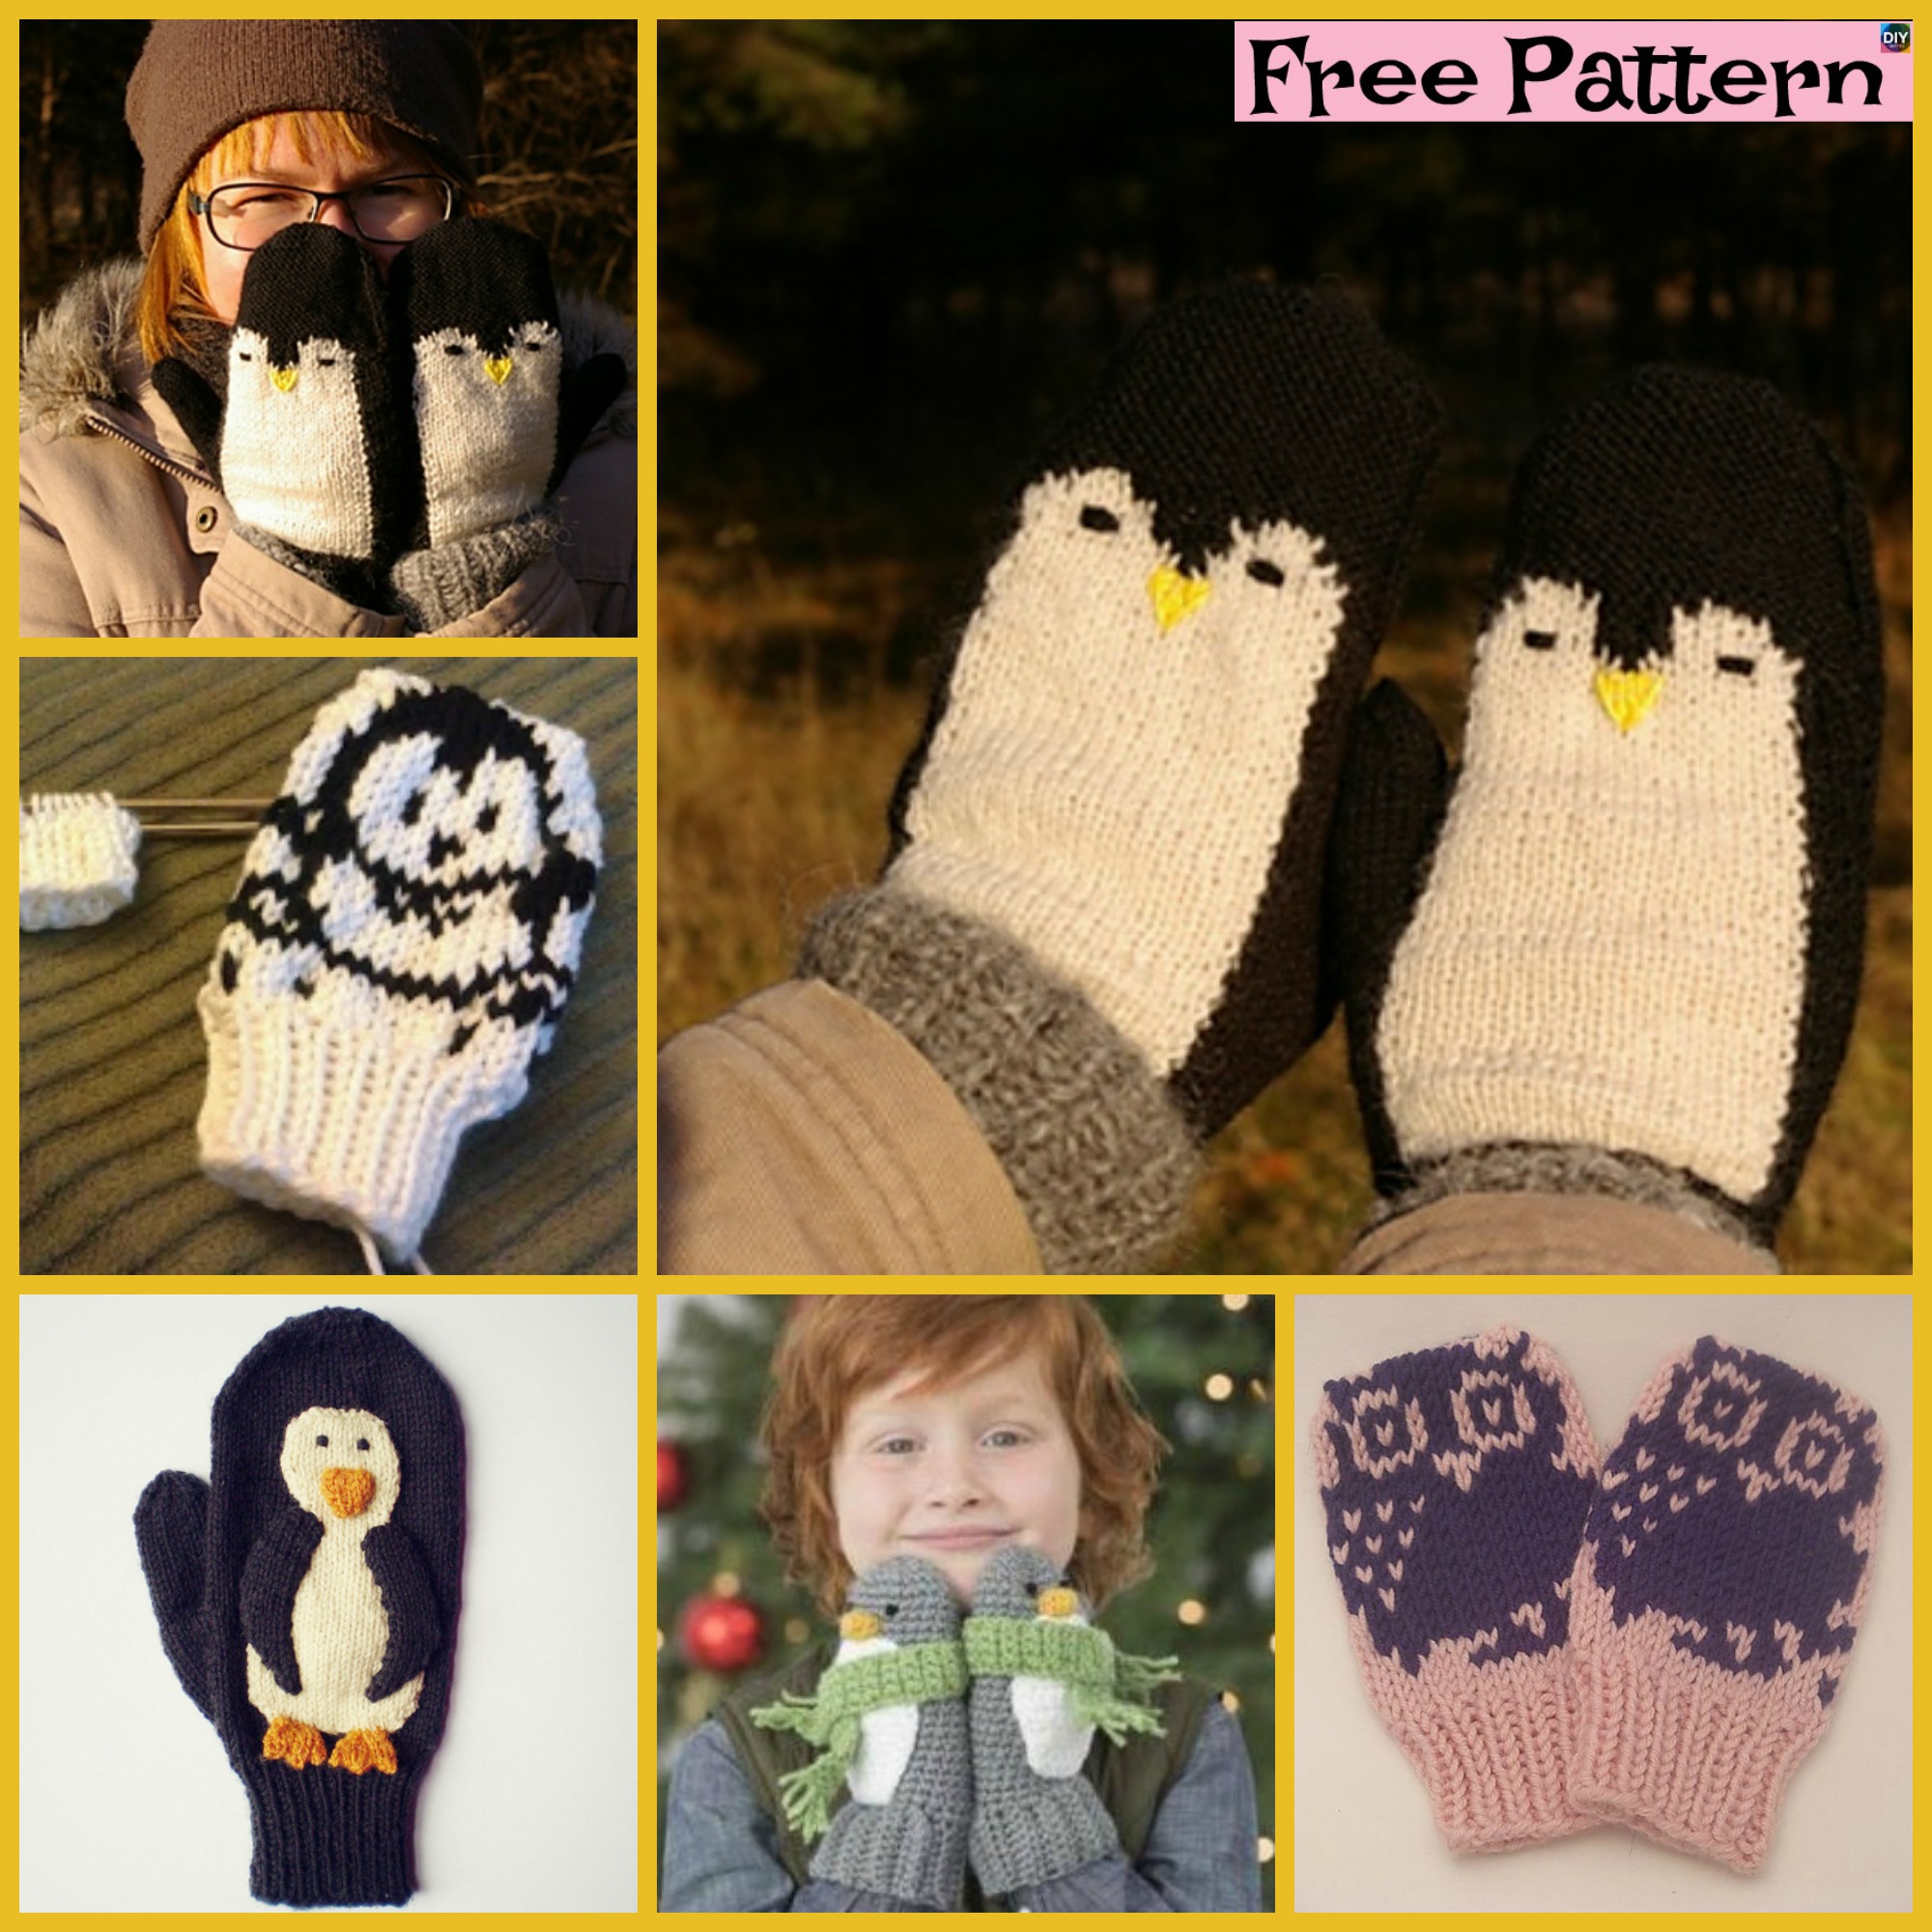 diy4ever-Adorable Knit Penguin Mittens - Free Patterns 